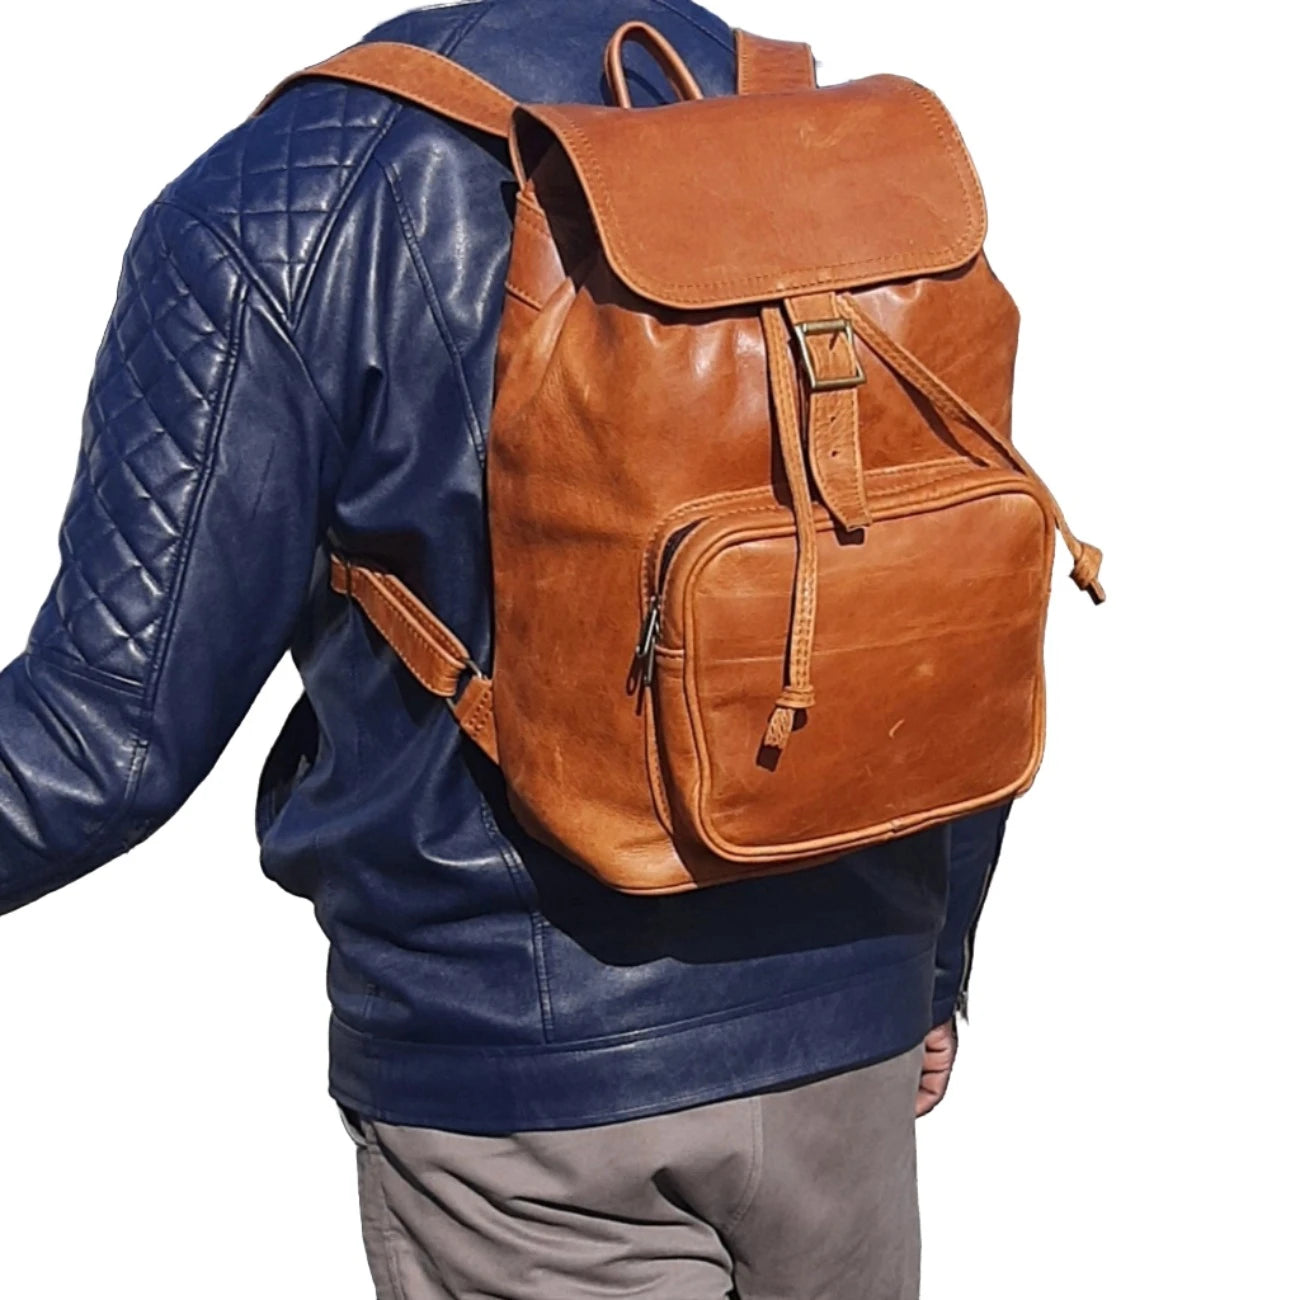 A gentle man carry toffe tan  leather backpack with flap xl without side pockets on his back outside Cape Masai Leather